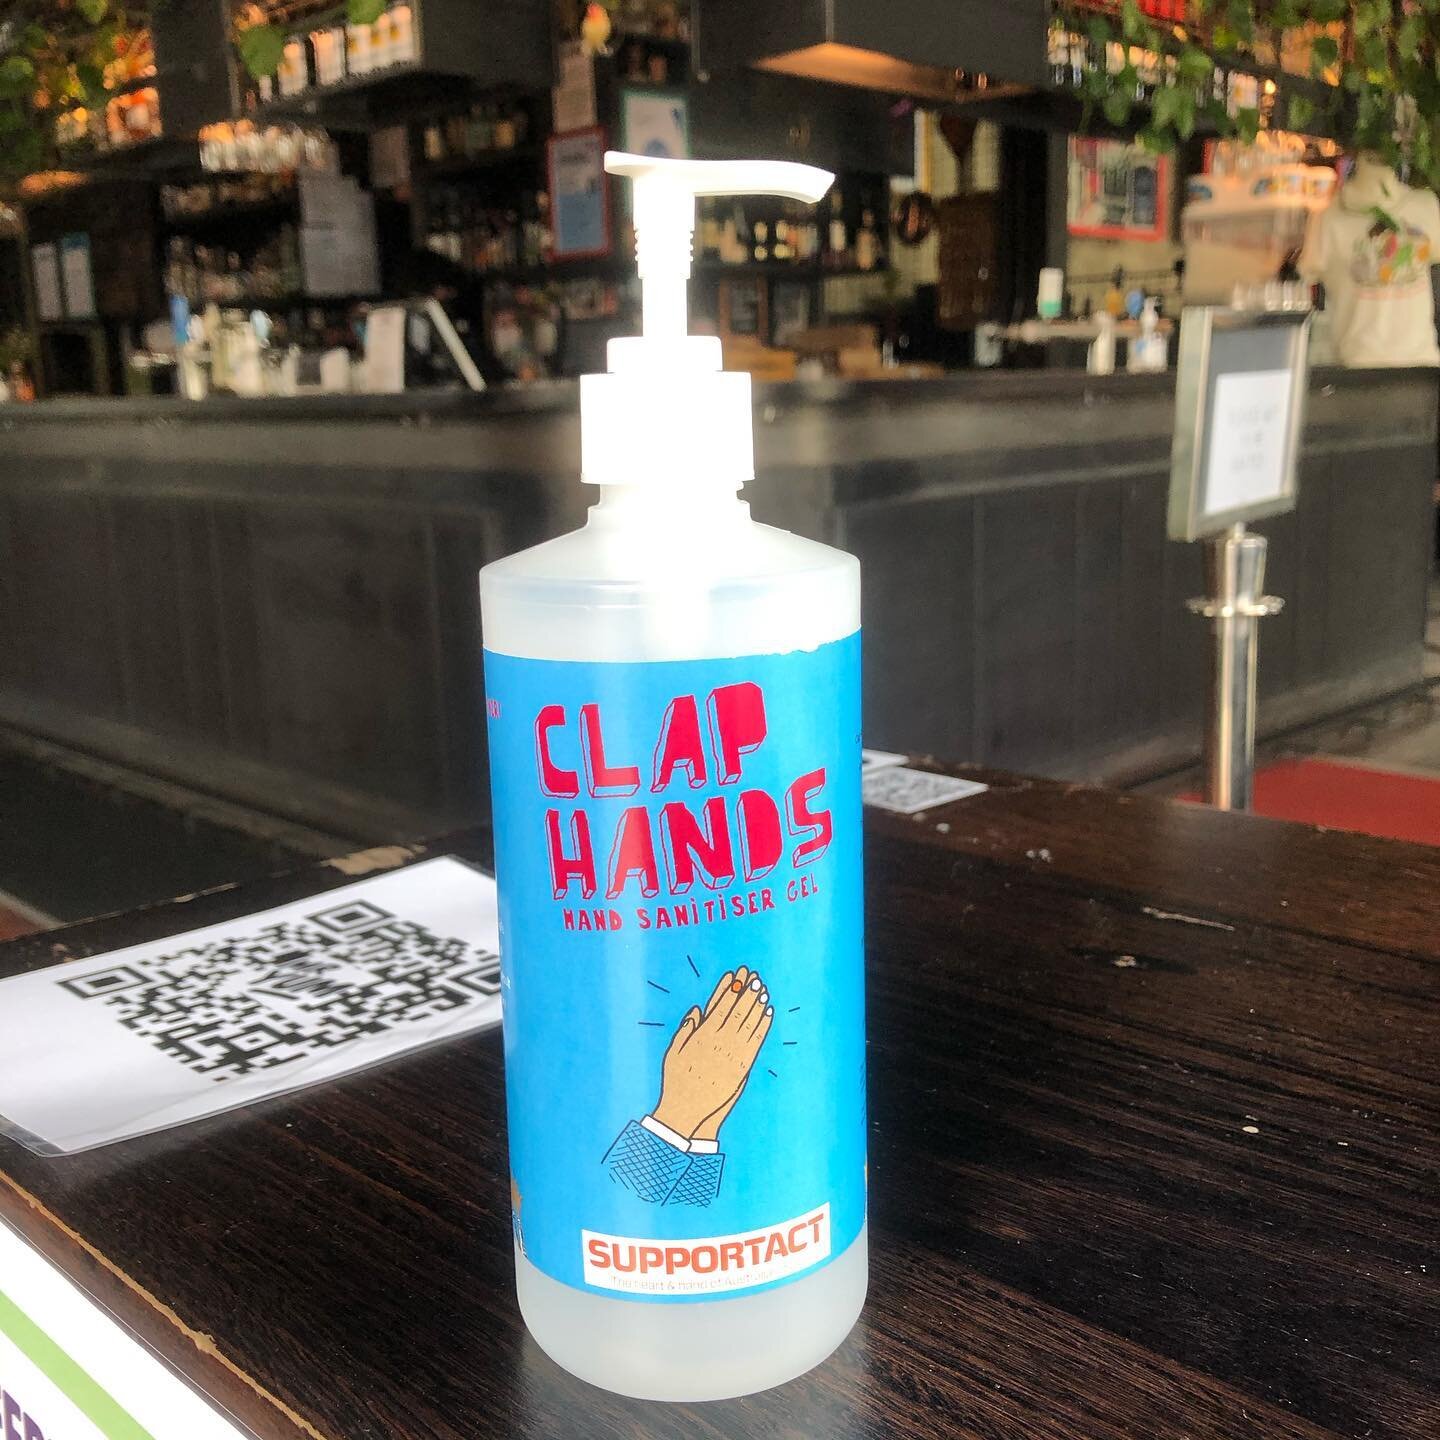 Popped in for a beer ,
Great to see Clap hands at the door at Northcote so-called club.